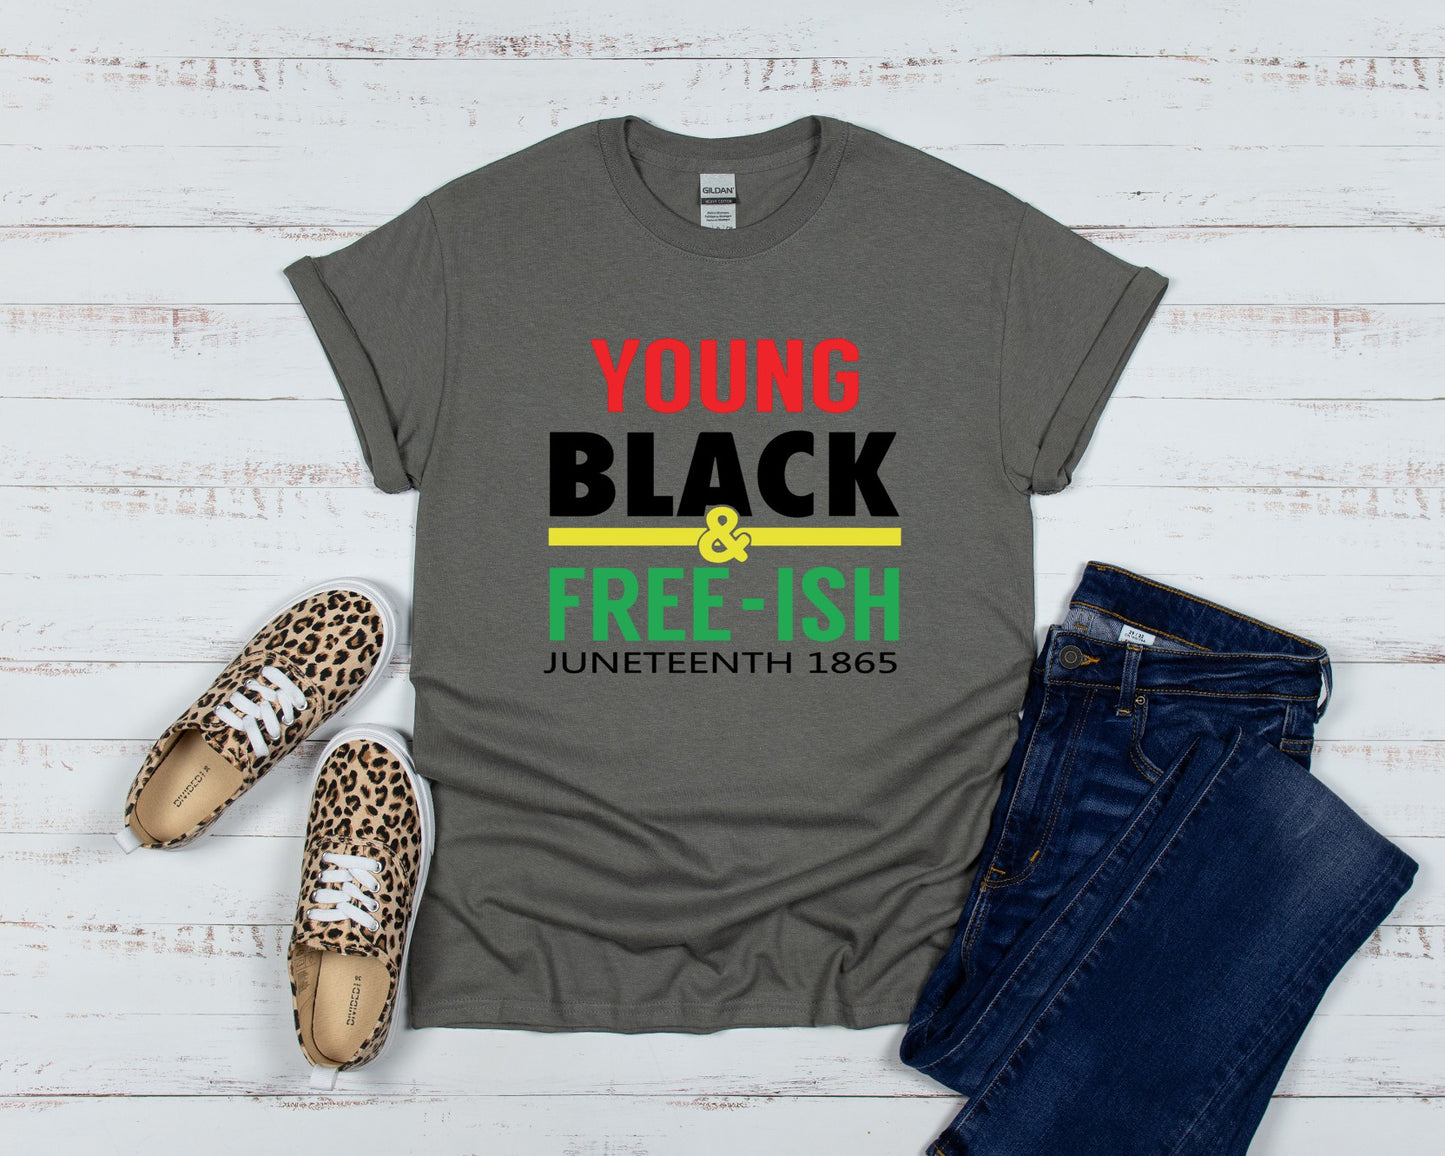 Young Black Freeish Juneteenth Tee